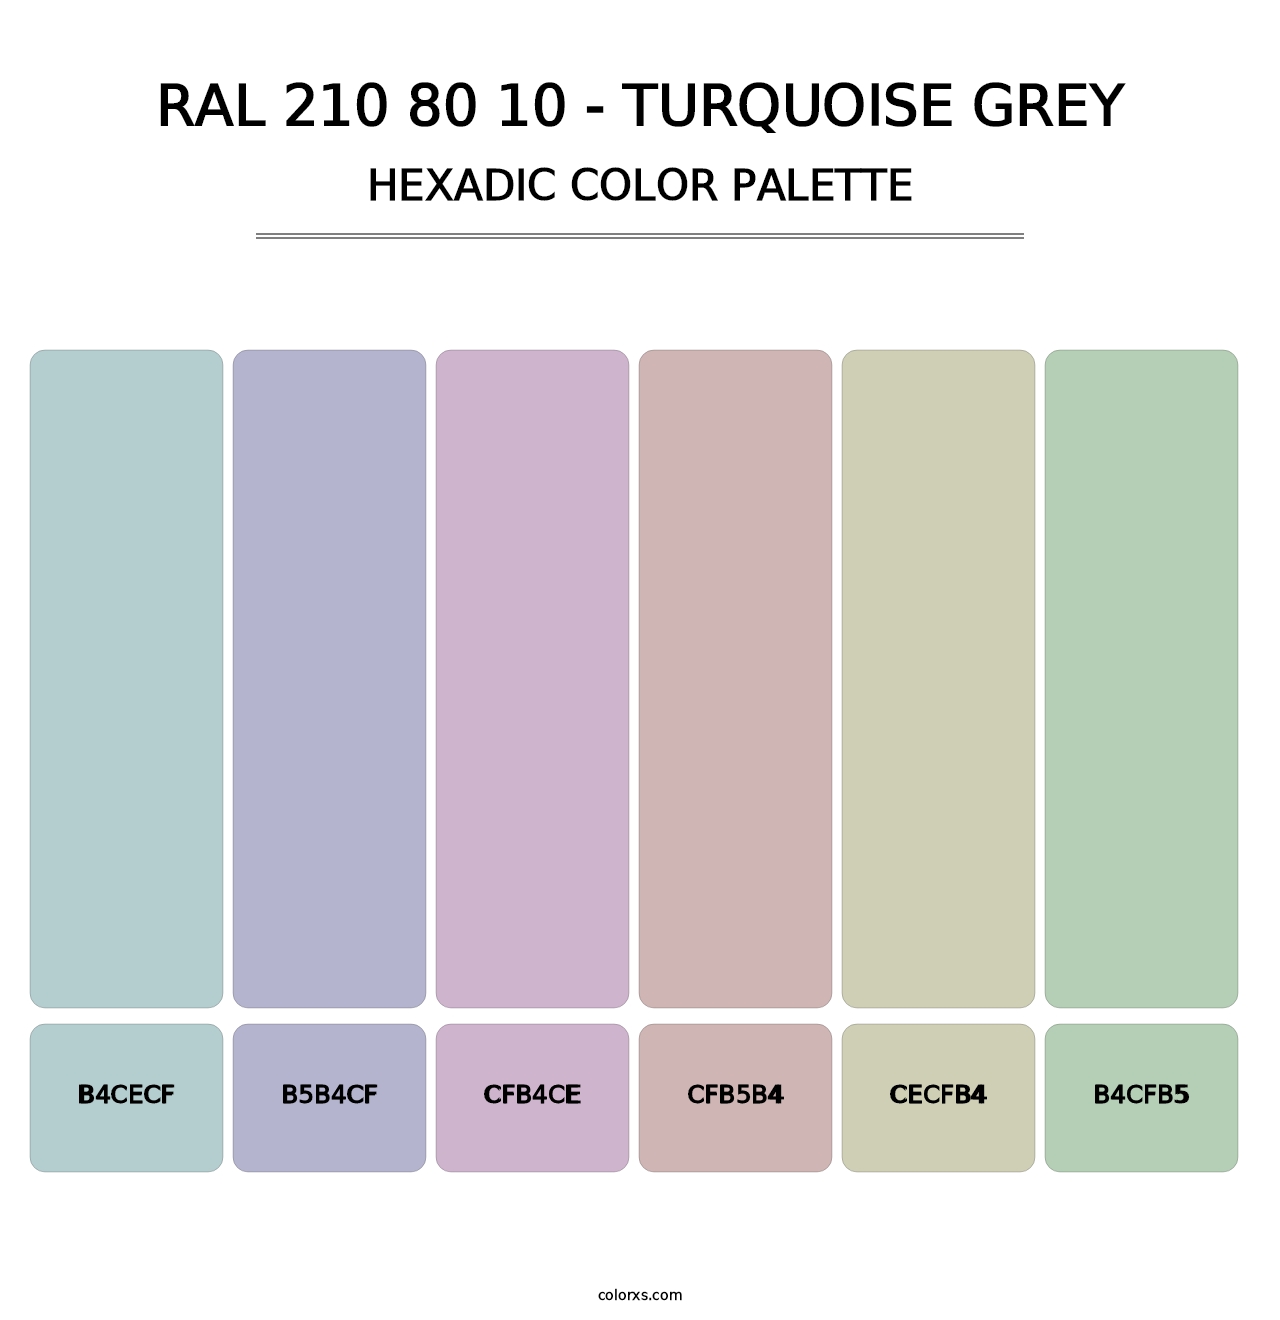 RAL 210 80 10 - Turquoise Grey - Hexadic Color Palette